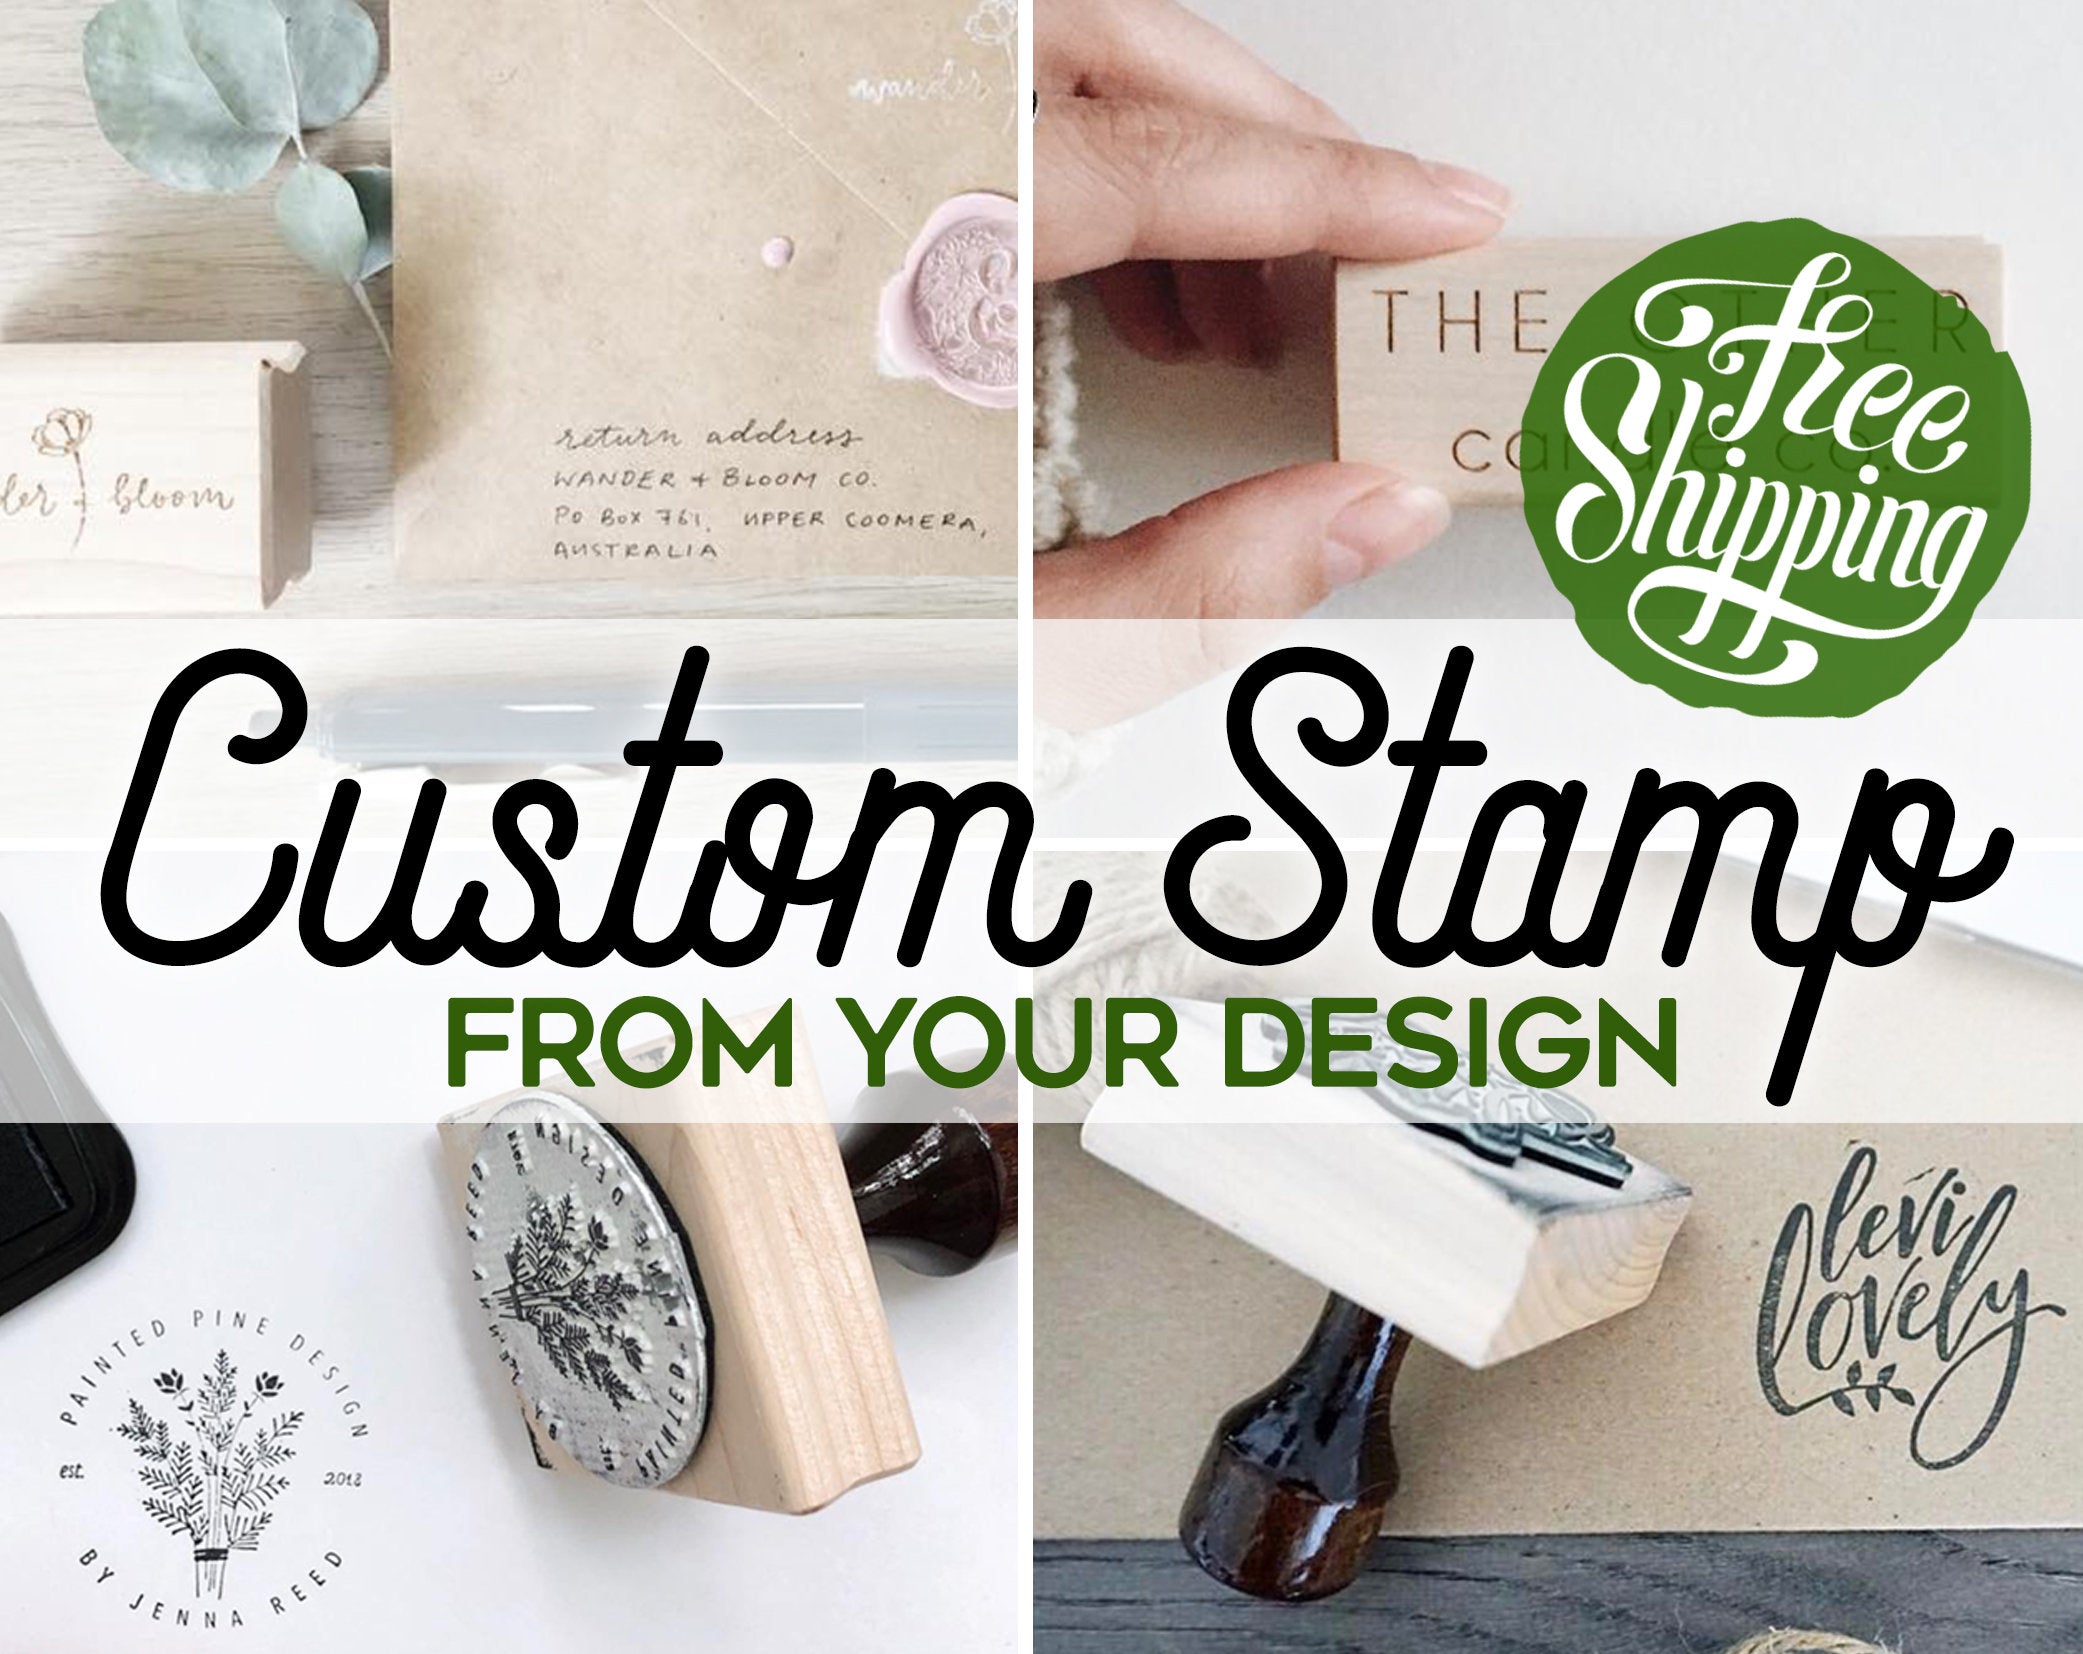 LARGE BUSINESS STAMP Design Stamps Large Custom Rubber Stamp Branding  Package Business Stamps Personalized Rubber Stamps 